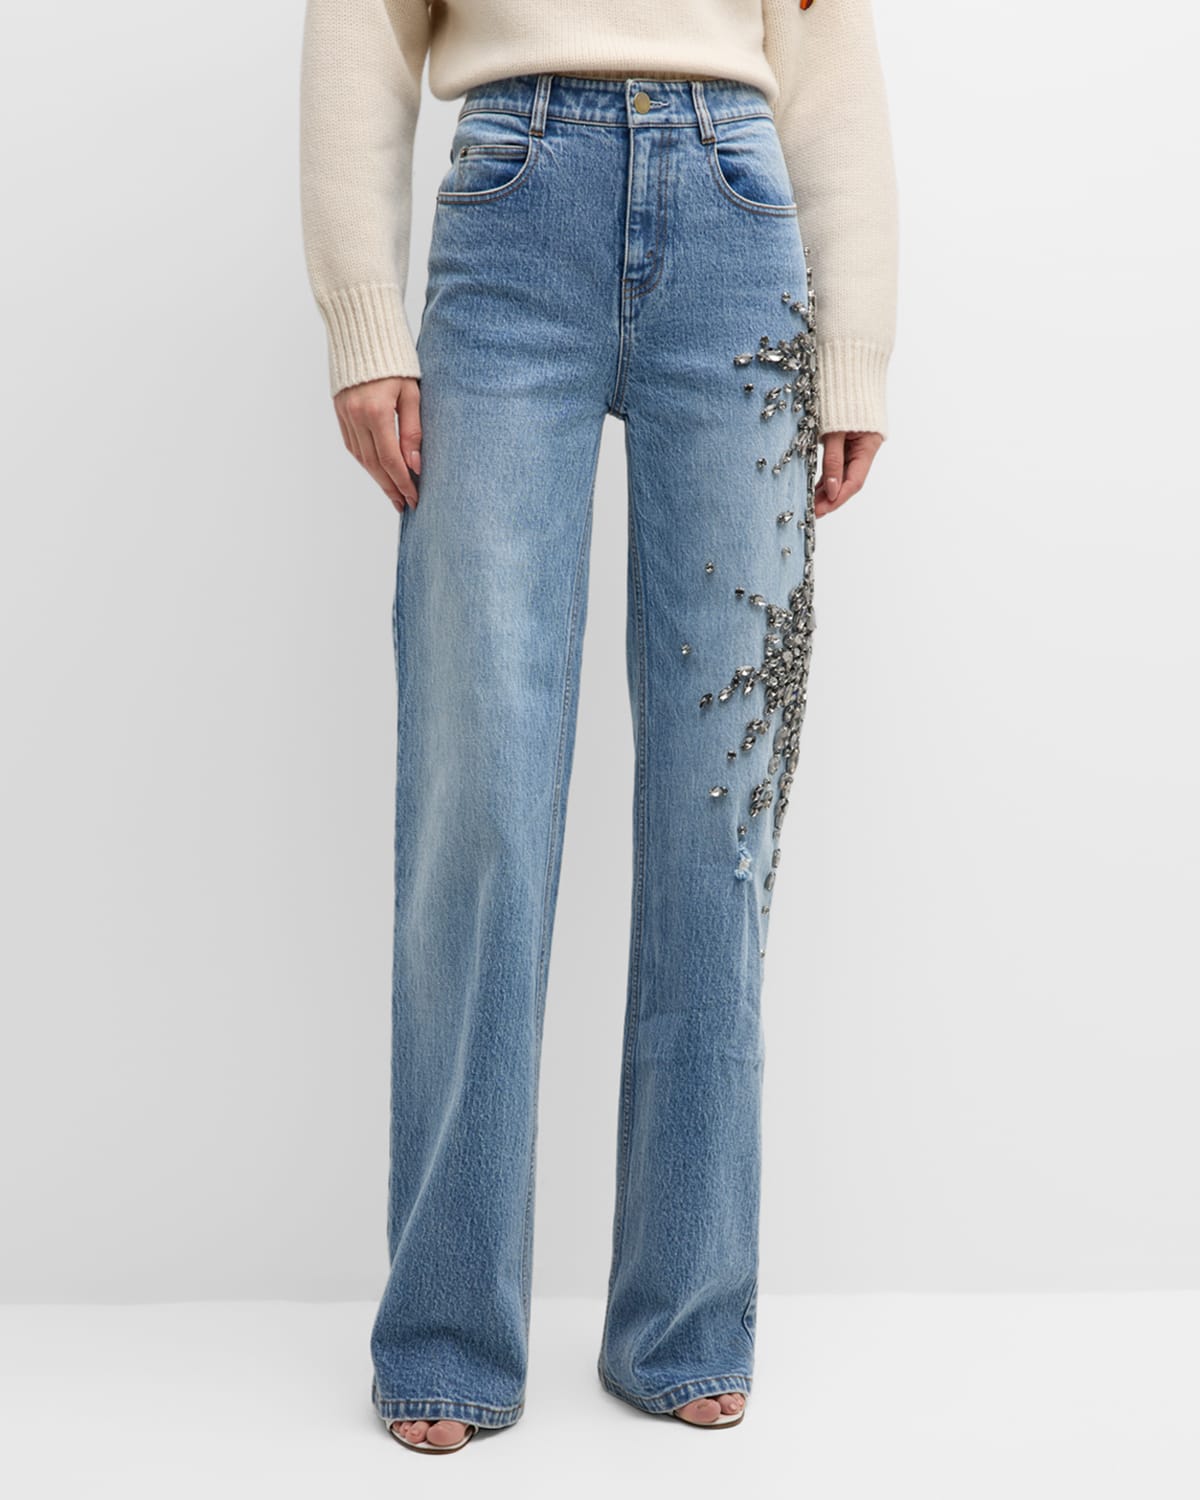 Hellessy Martin High-rise Crystal Straight-leg Jeans In Lili Wash